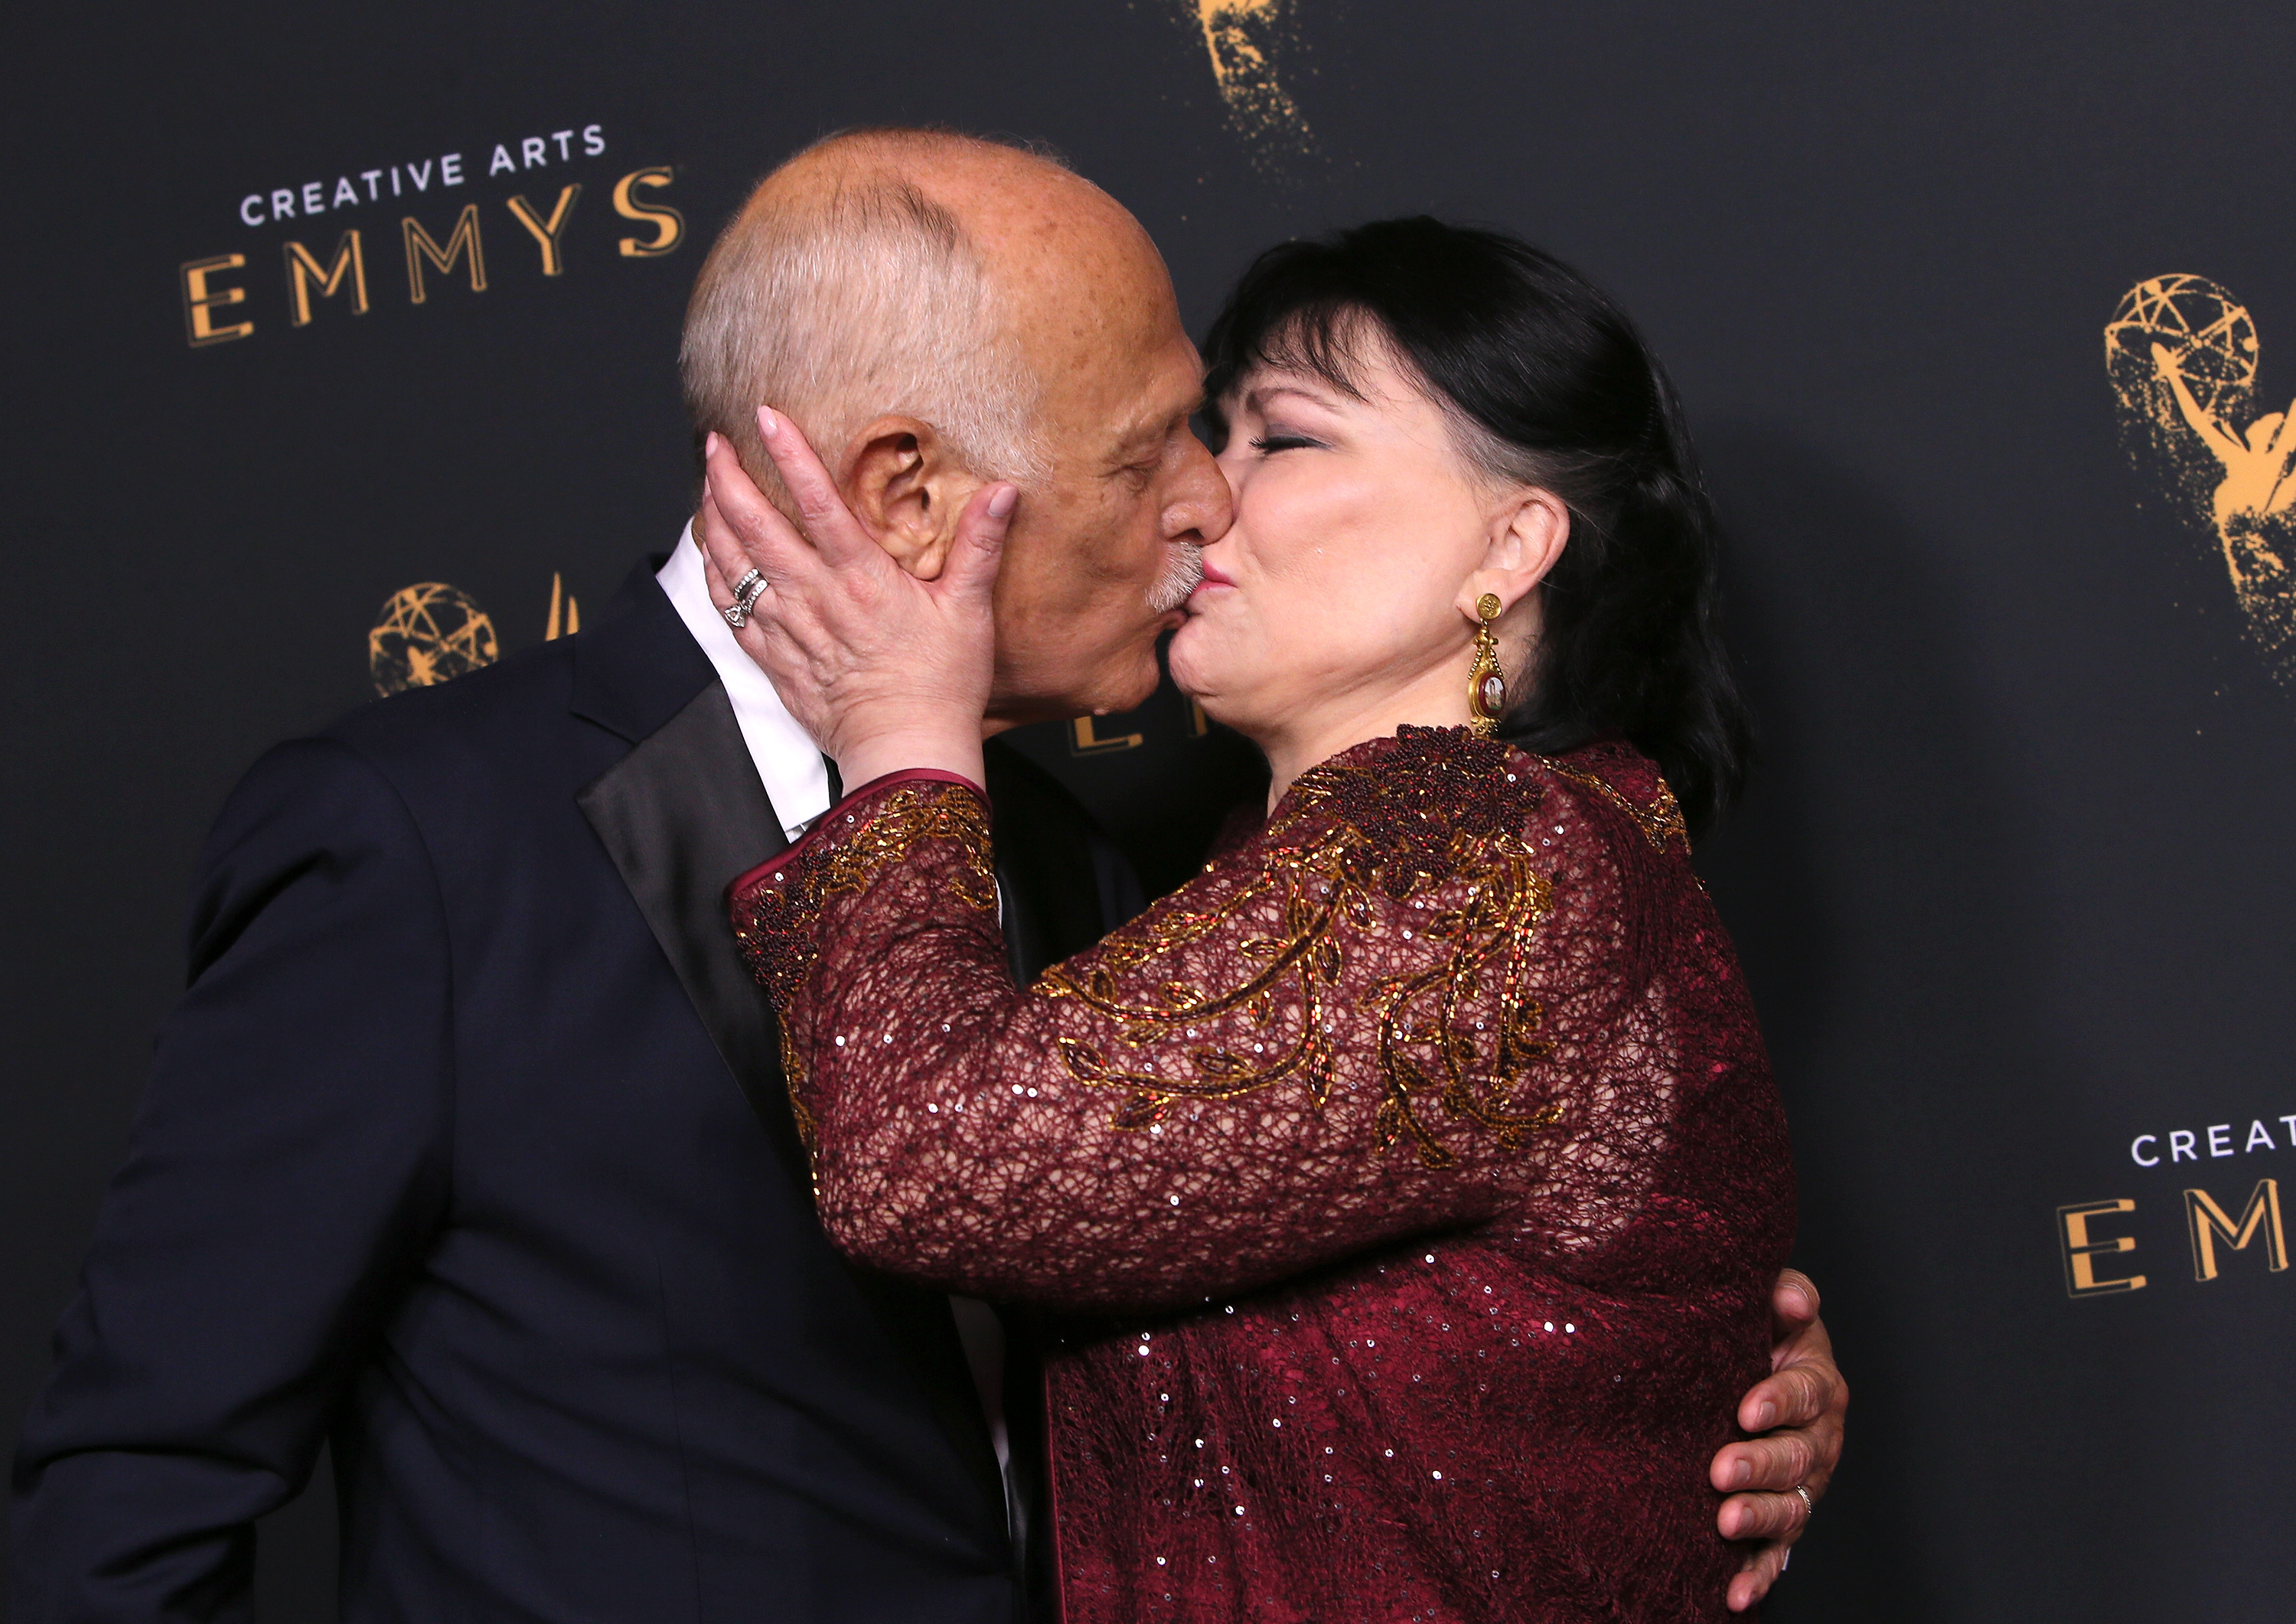 Actor Gerald McRaney (L) poses in the press room with the award for Outstanding Guest Actor in a Drama Series for "This is Us" with actress Delta Burke at the 2017 Creative Arts Emmy Awards at Microsoft Theater on September 10, 2017, in Los Angeles, California. | Source: Getty Images